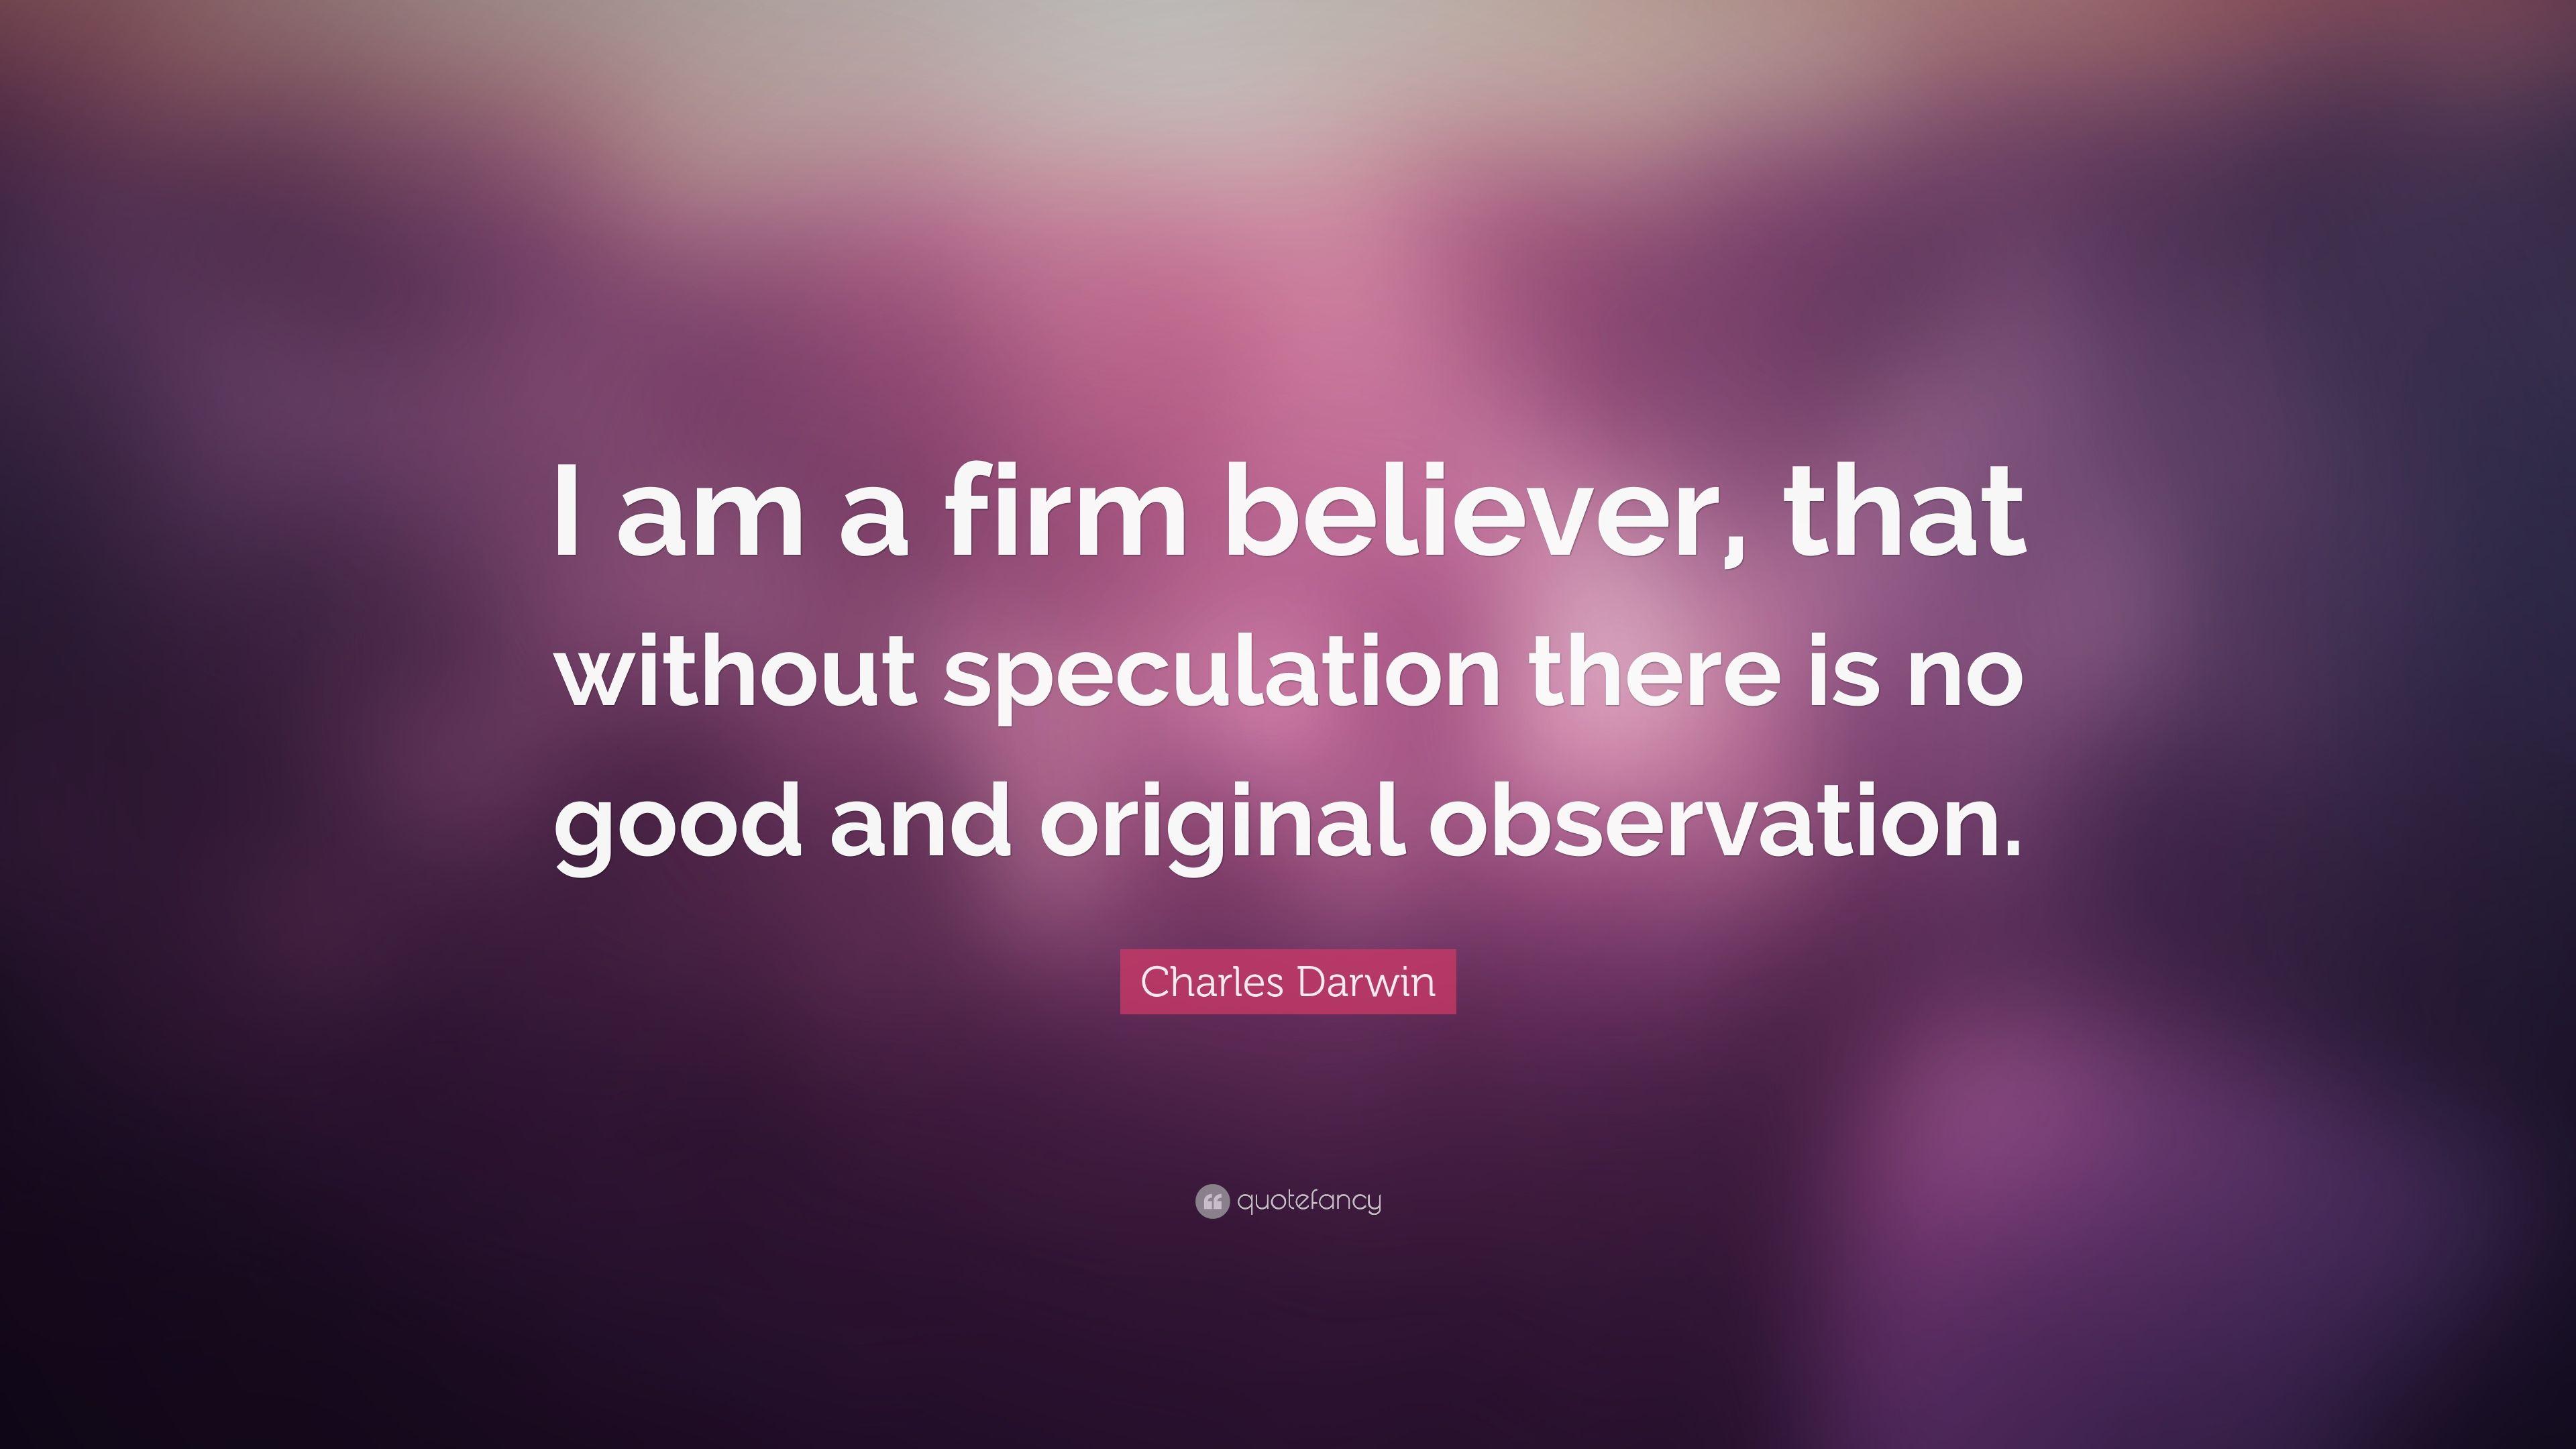 Charles Darwin Quote: “I am a firm believer, that without